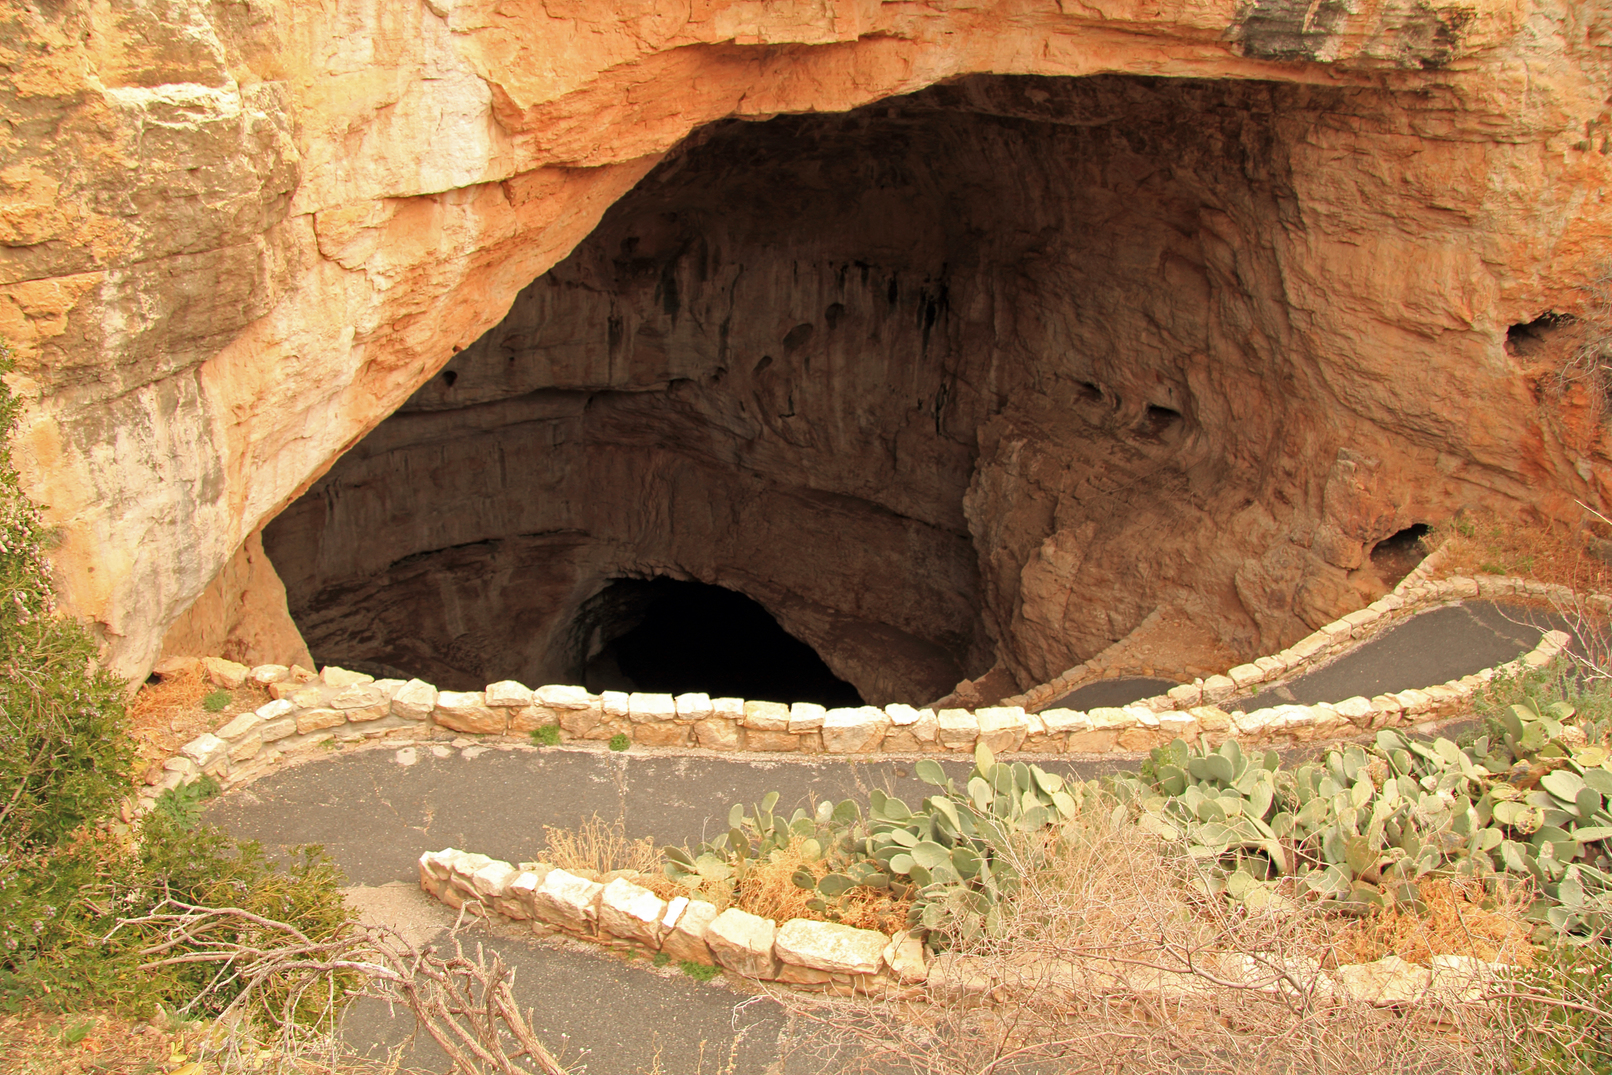 Environmental Rights Group Sues to Protect Carlsbad Caverns from Oil and Gas Development